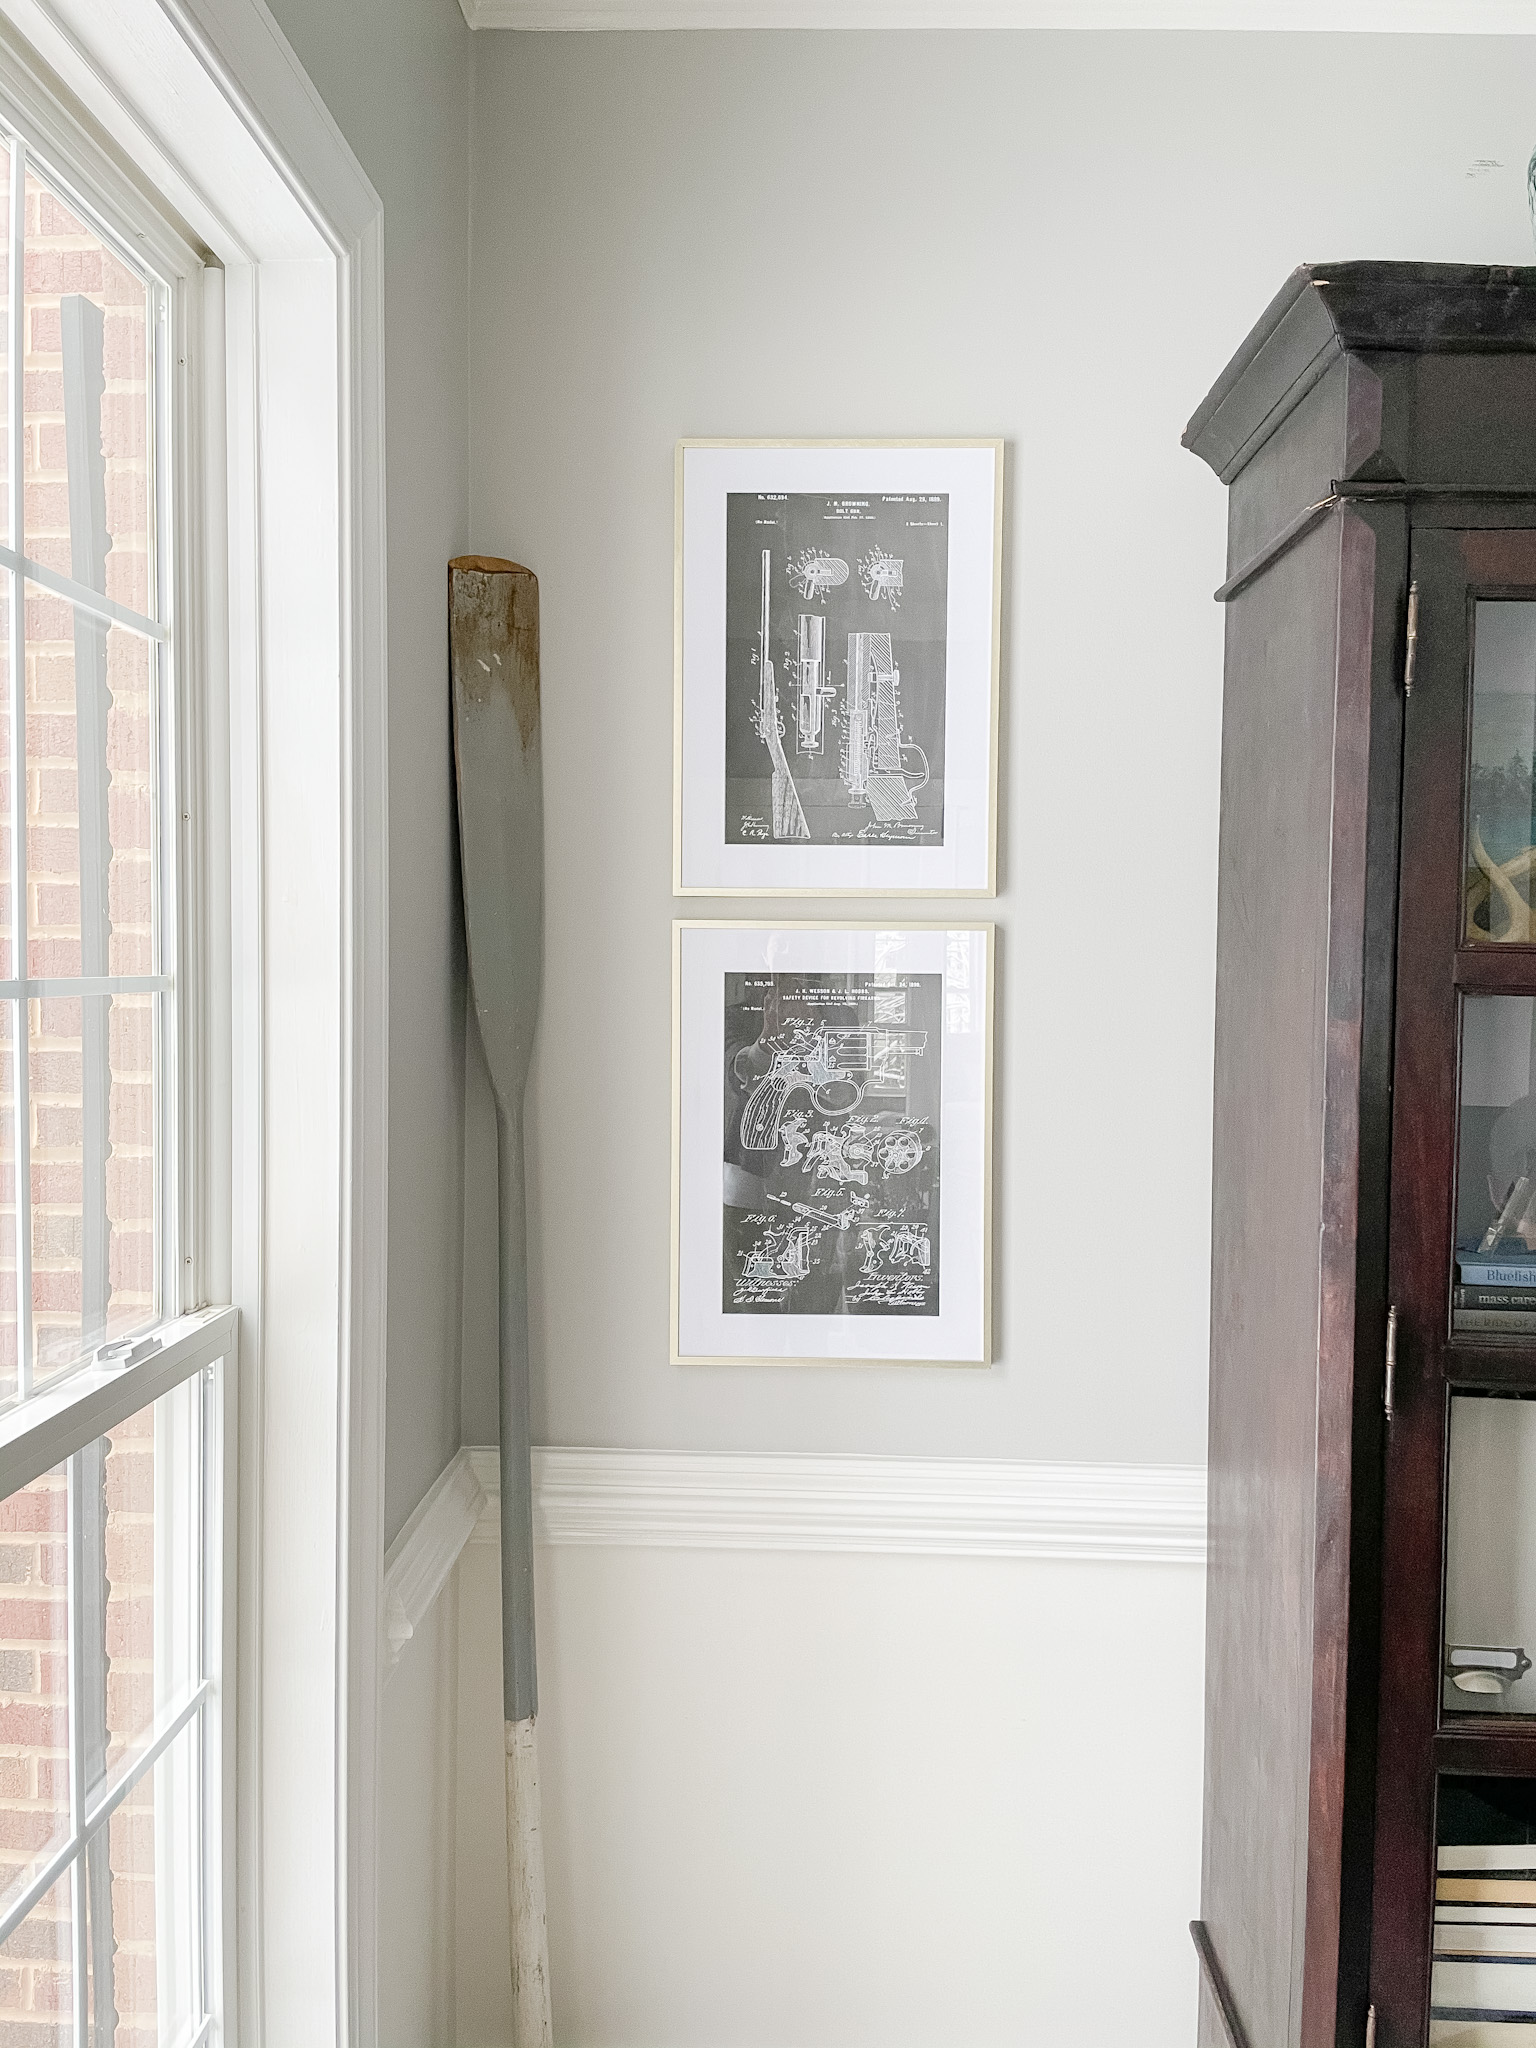 Two blue print sketches in gold frames hanging on the wall